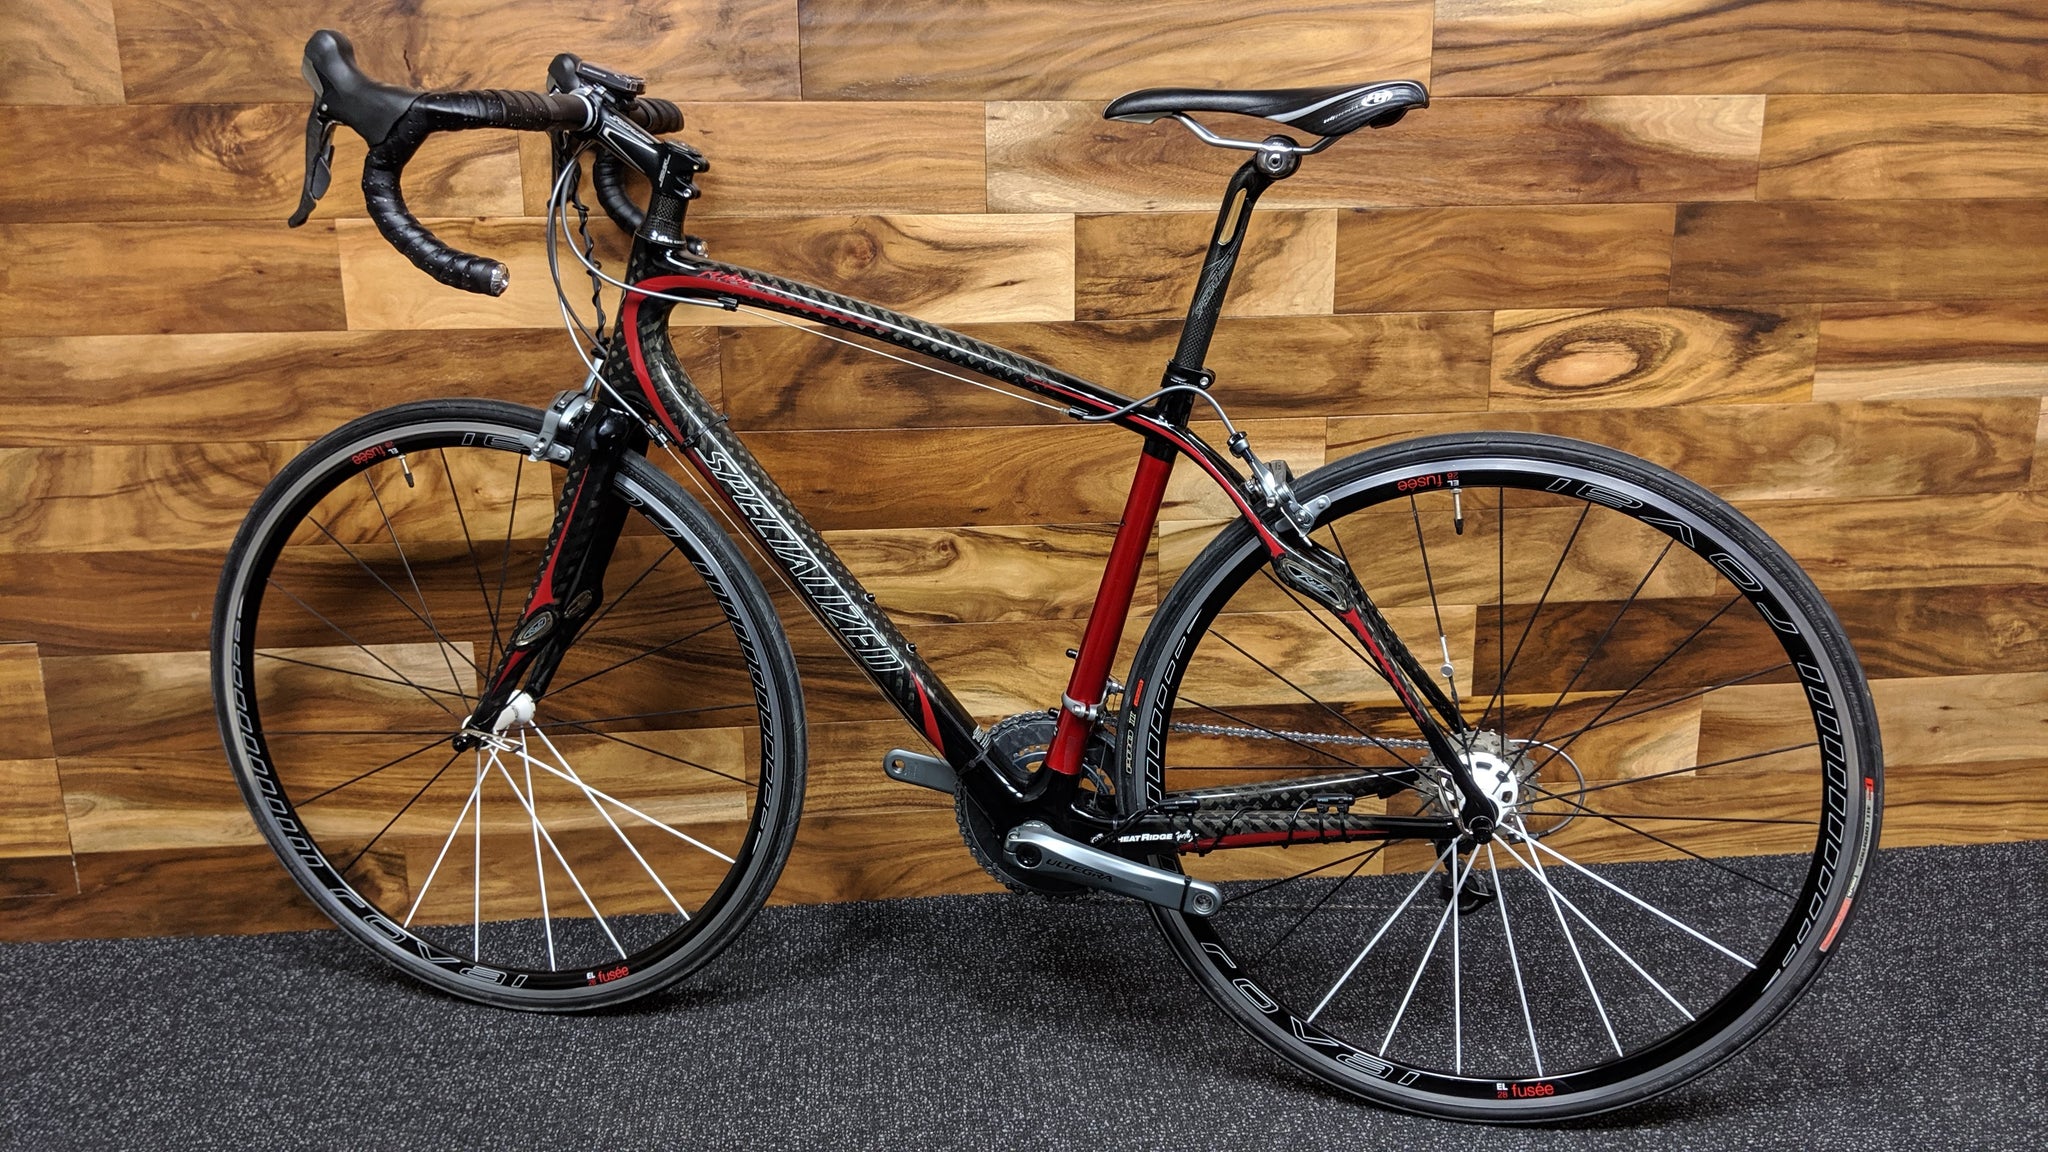 2010 SPECIALIZED RUBY EXPERT CARBON